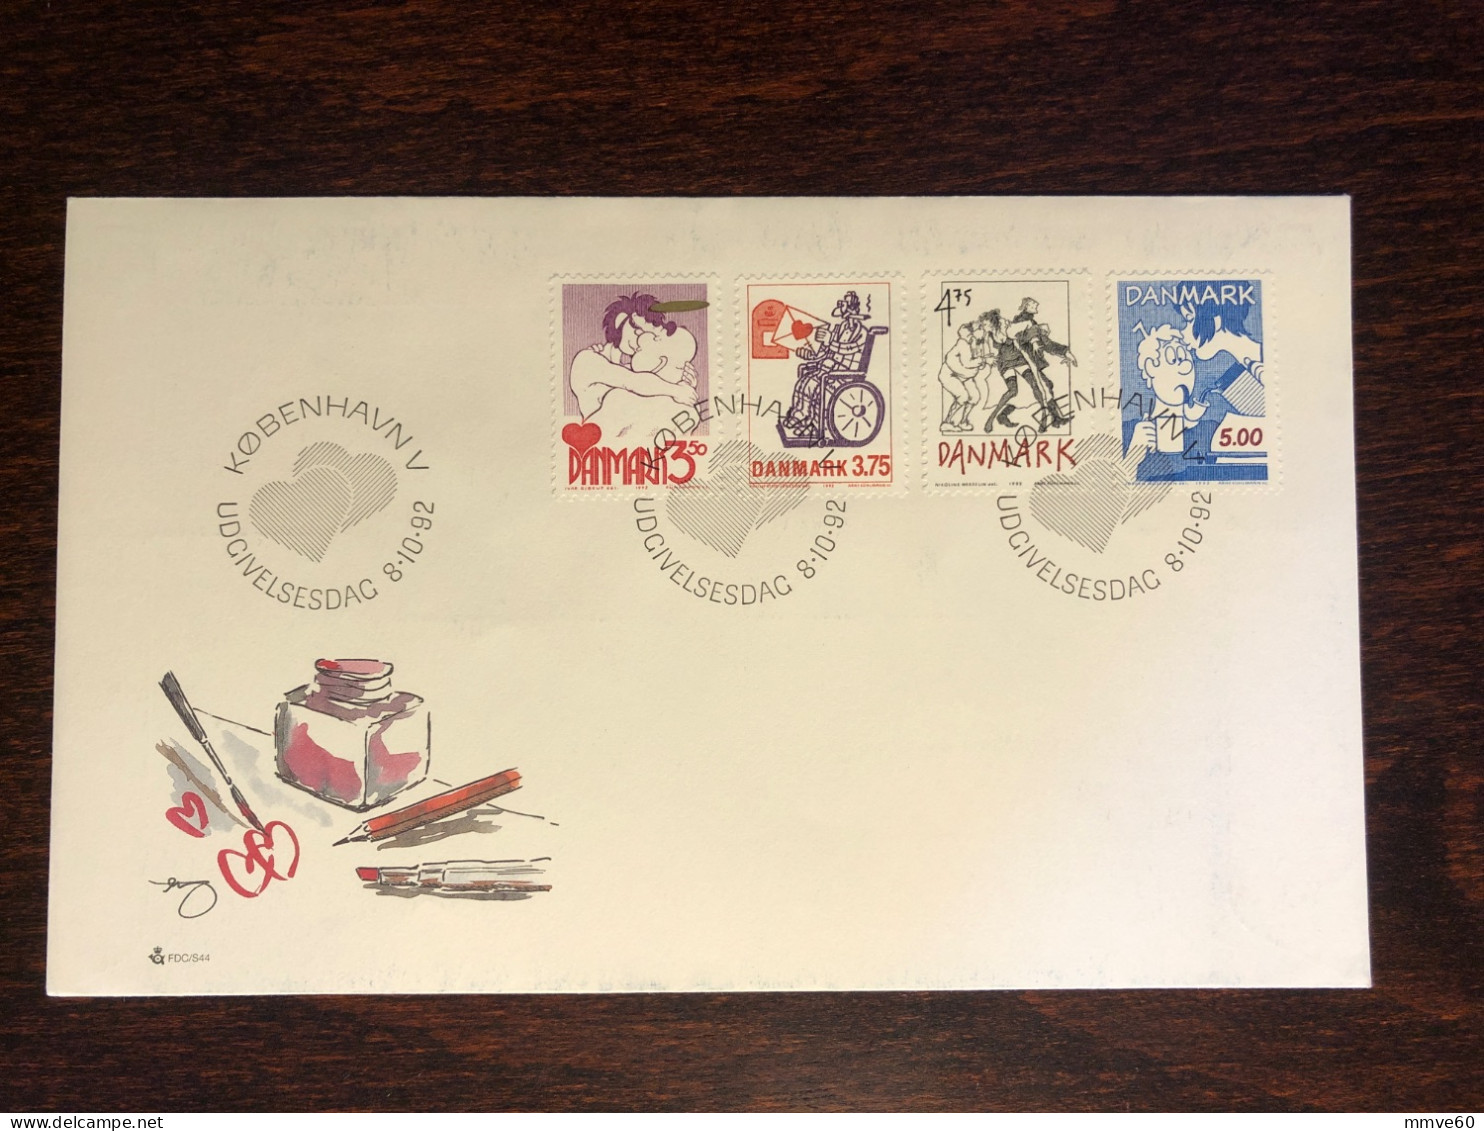 DENMARK FDC COVER 1992 YEAR DISABLED PEOPLE HEALTH MEDICINE STAMPS - FDC